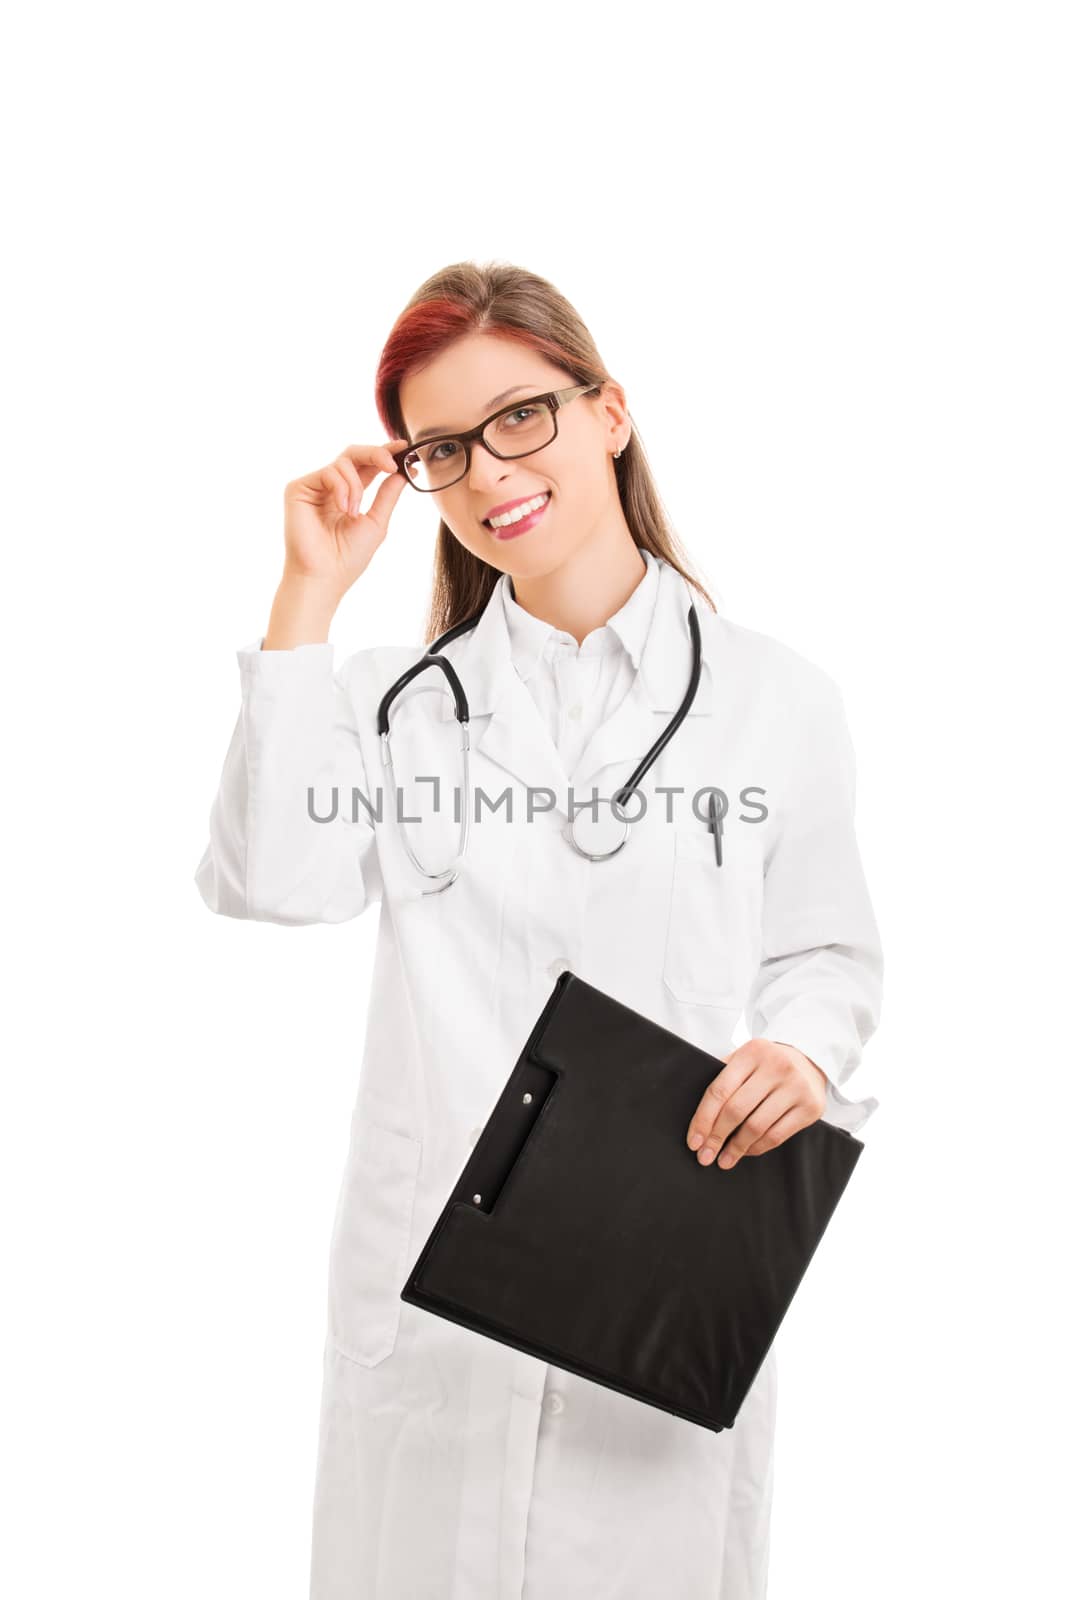 We're here for you. Portrait of a smiling beautiful febale doctor holding a notepad, isolated on white background.